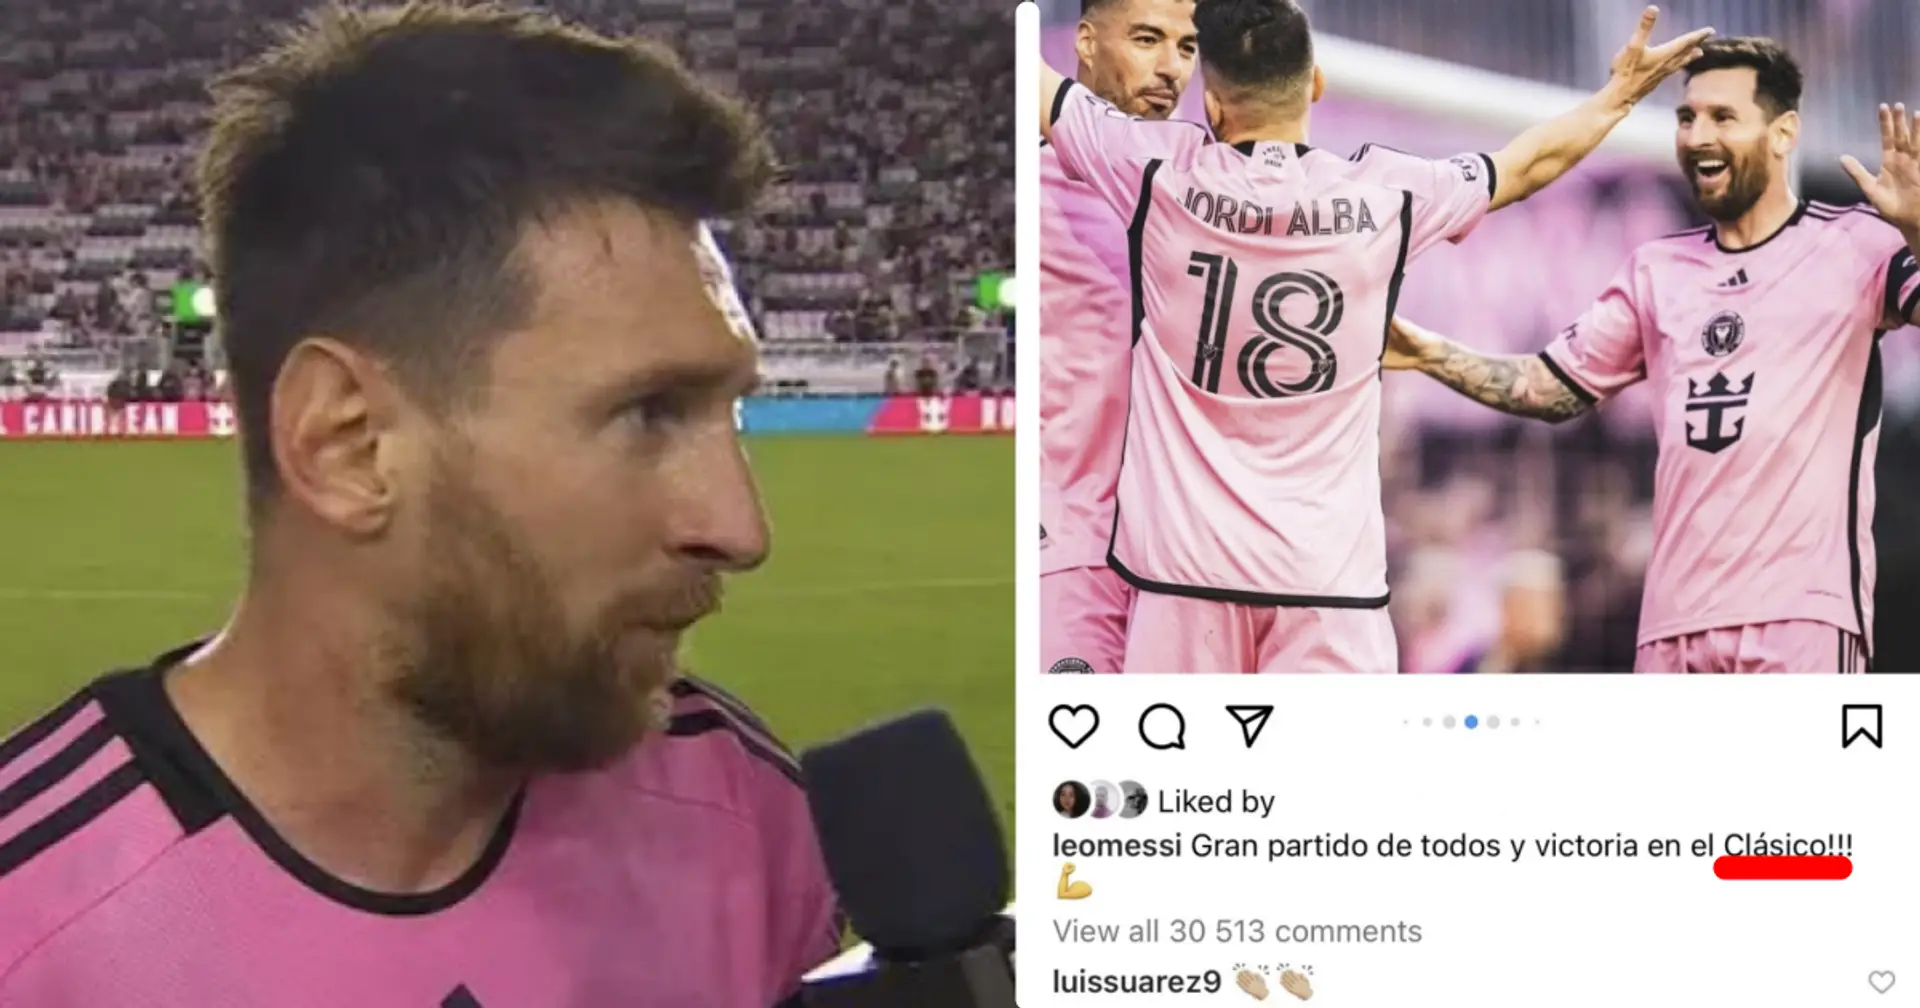 Why did Leo Messi mention 'Clasico' in his latest Instagram post?